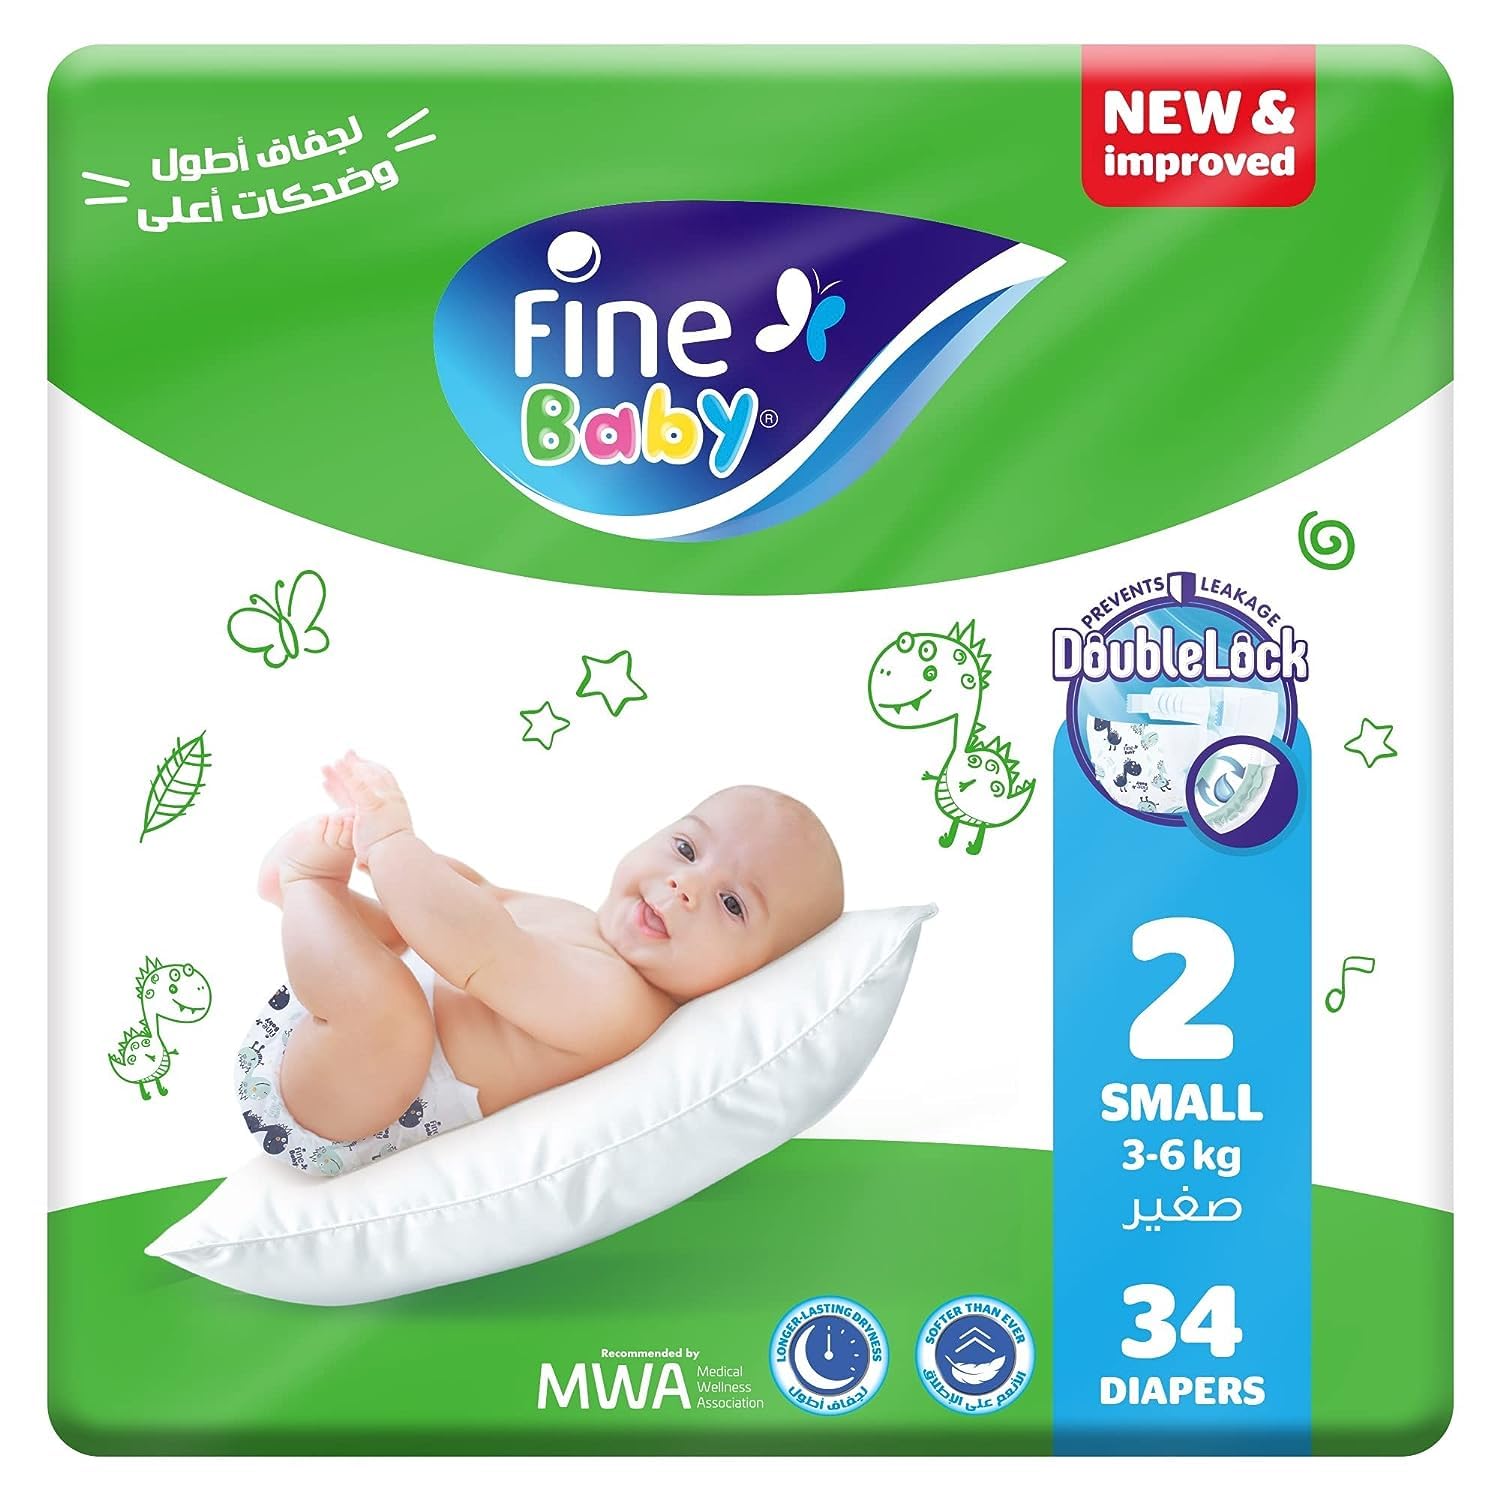 Baby Diapers Size 2 (3-6kg) Medium, 34 count - Fine Baby® with the NEW Double Lock leak barriers!